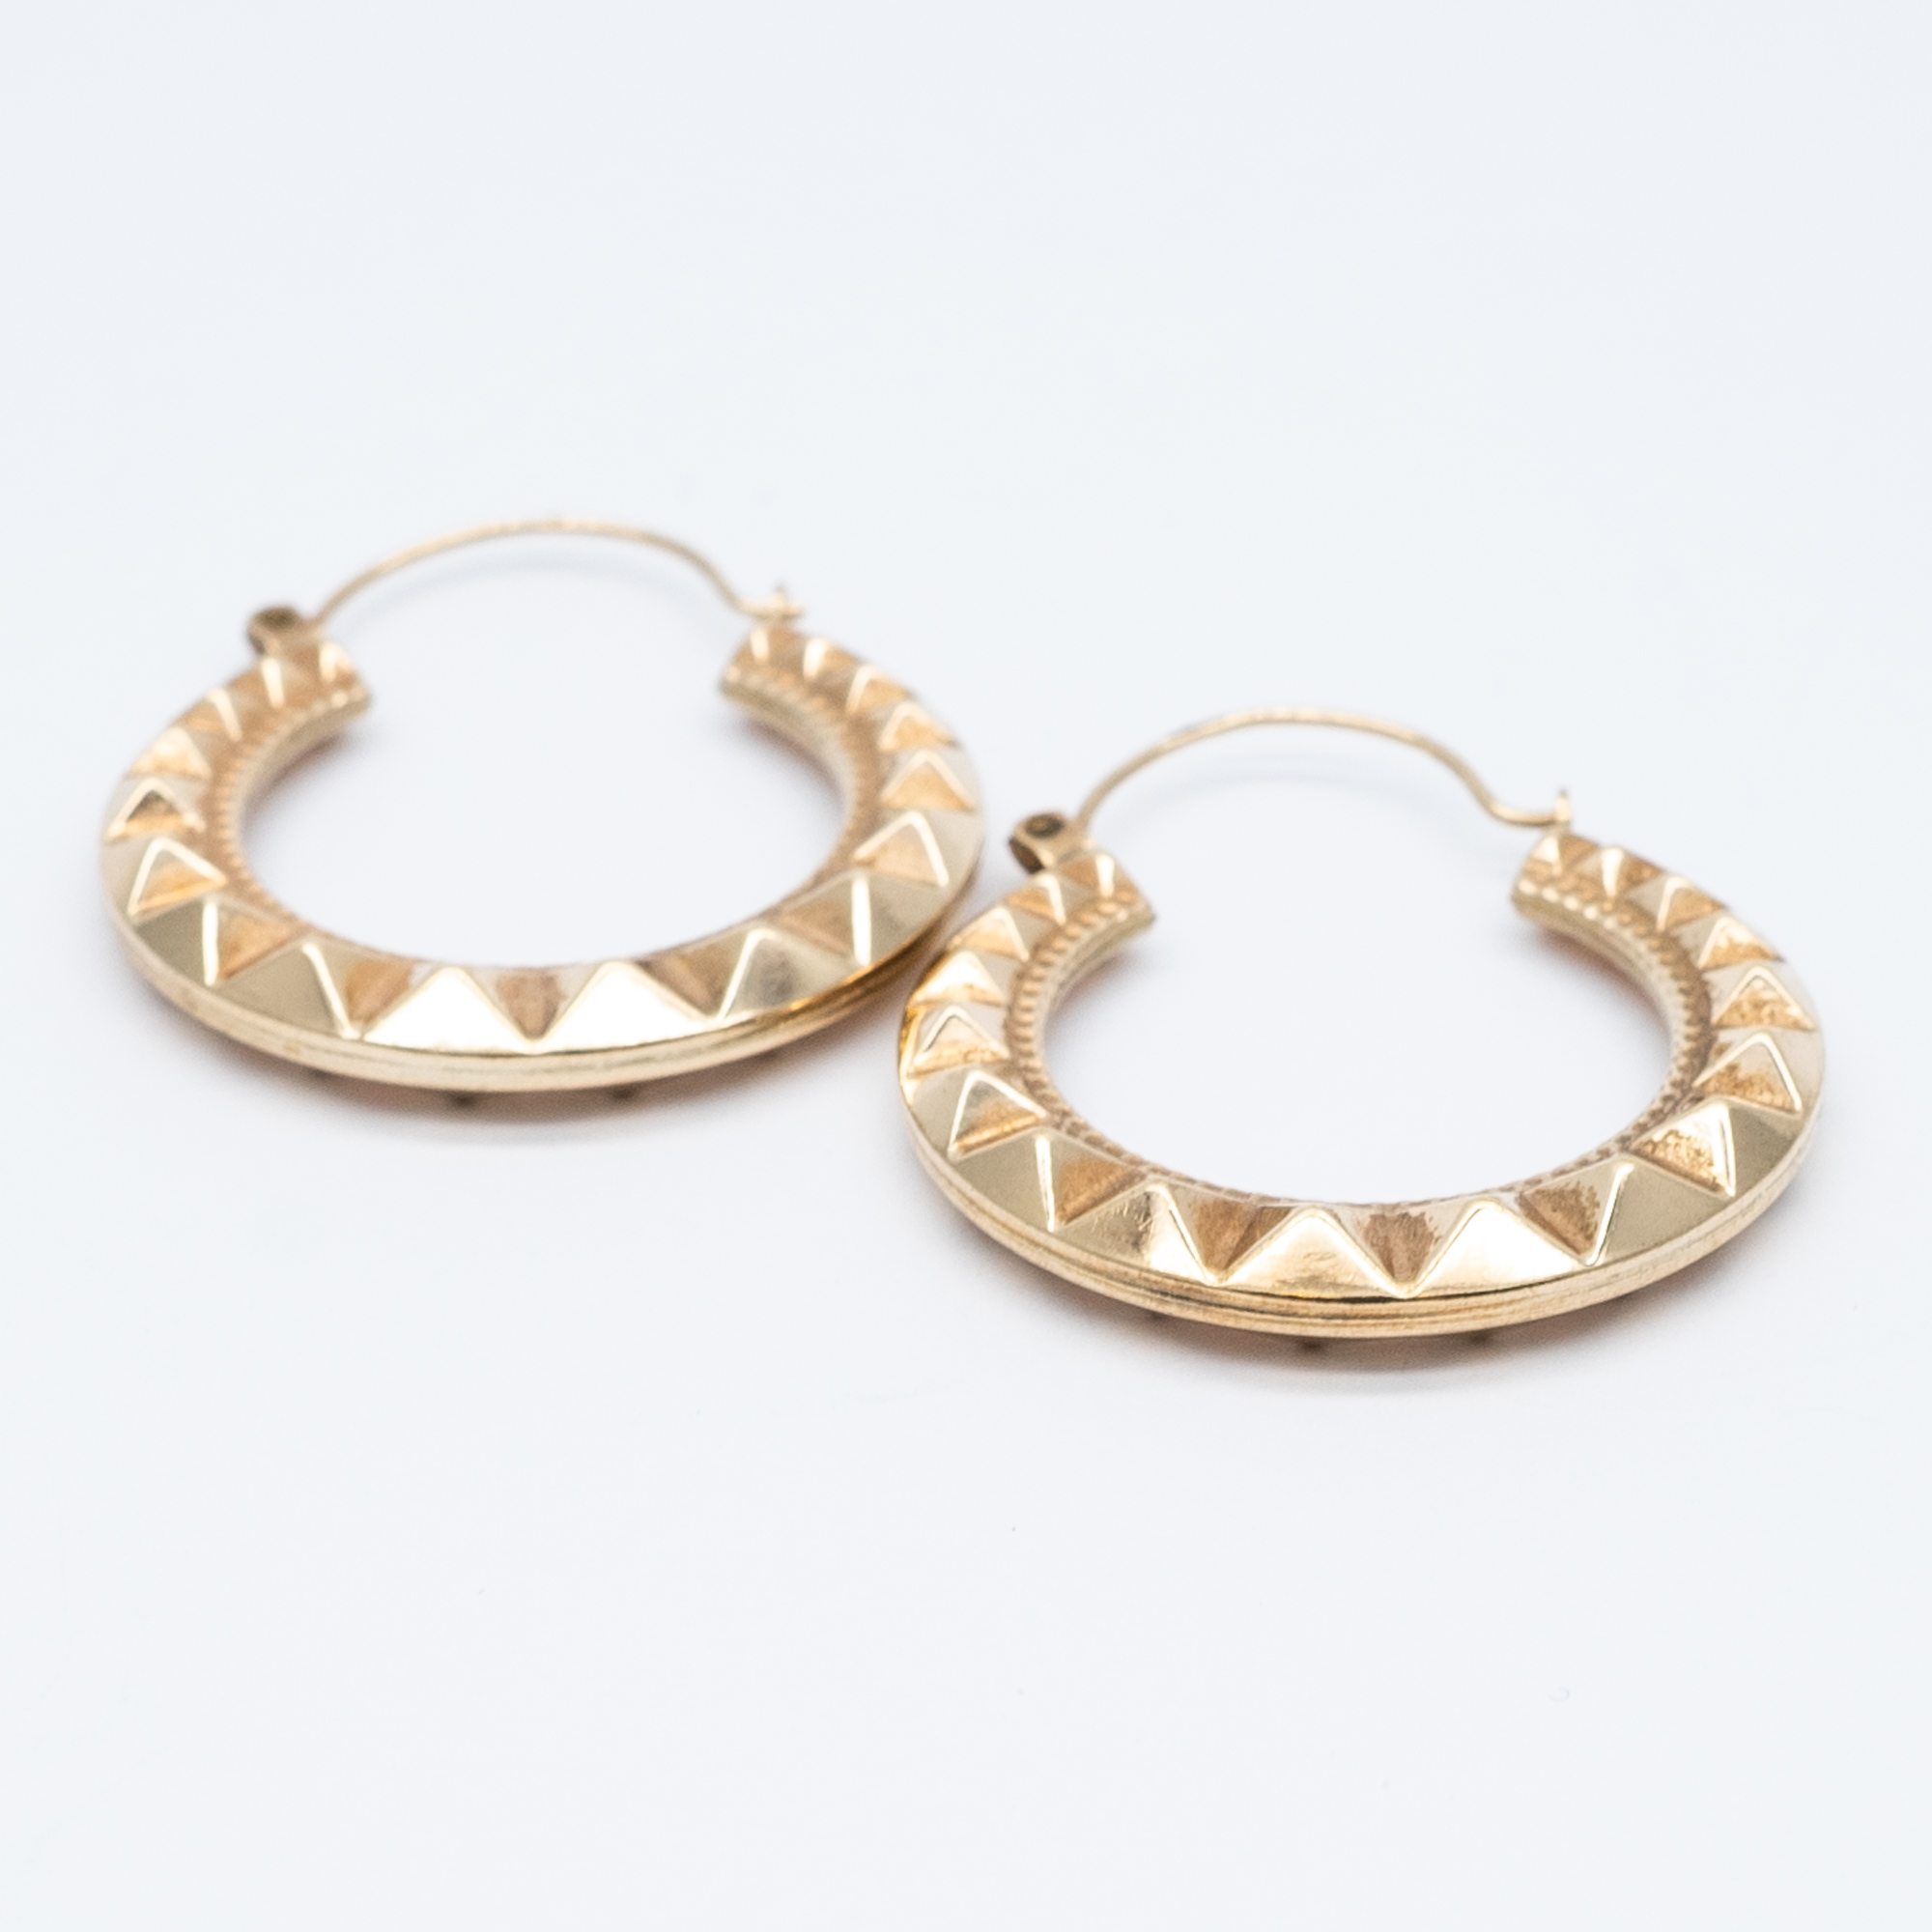 A pair of 9ct yellow gold pyramid cut earrings - Image 2 of 4